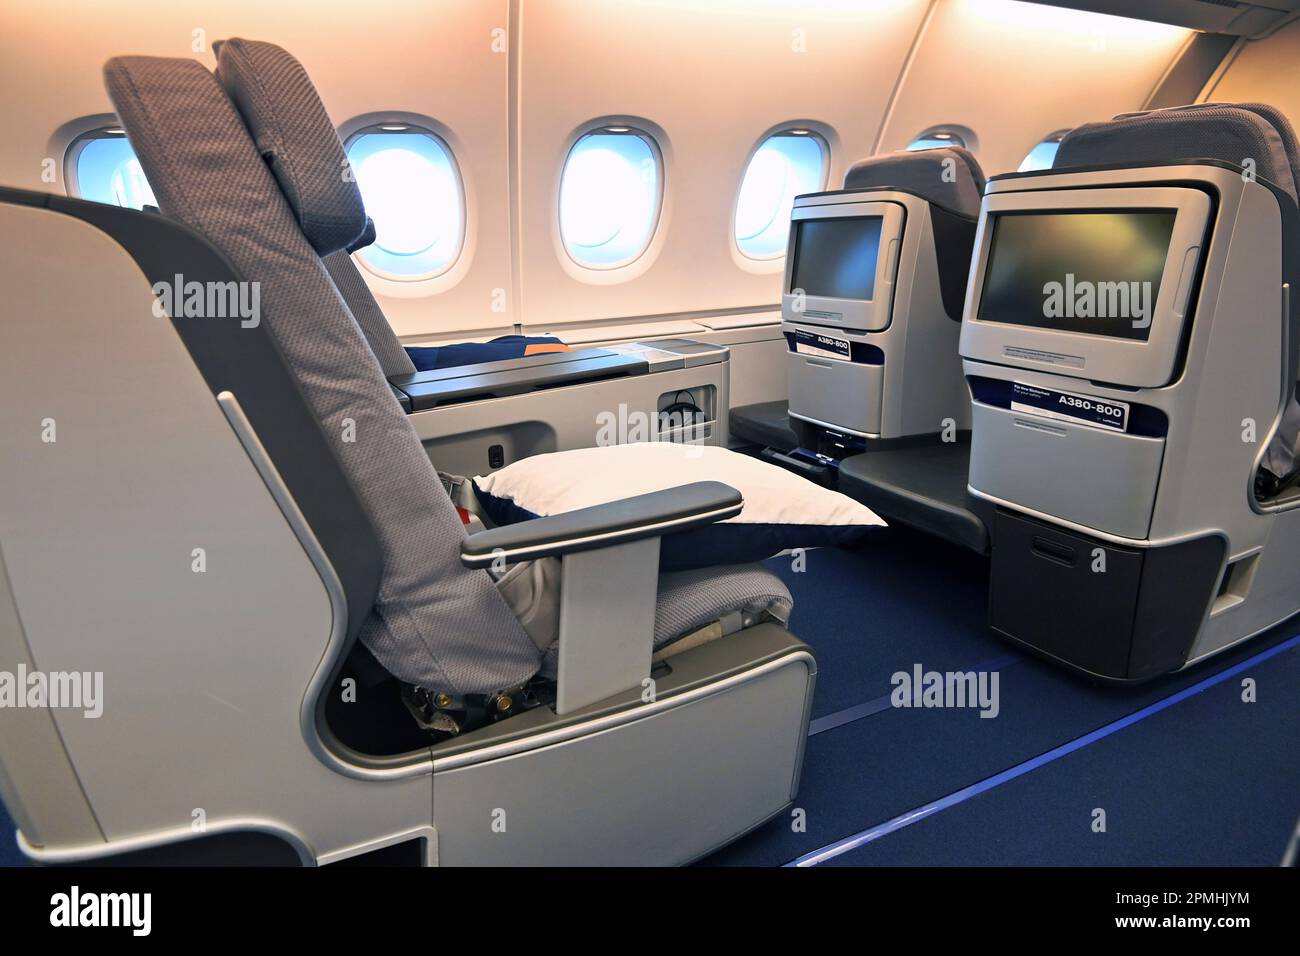 Lufthansa Airbus A380 long-haul aircraft will land again for the first time in Munich at Franz Josef Strauss Airport on April 12, 2023. Business class, rows of seats, seats, seats, empty airplane cabin with no passengers. ? Stock Photo